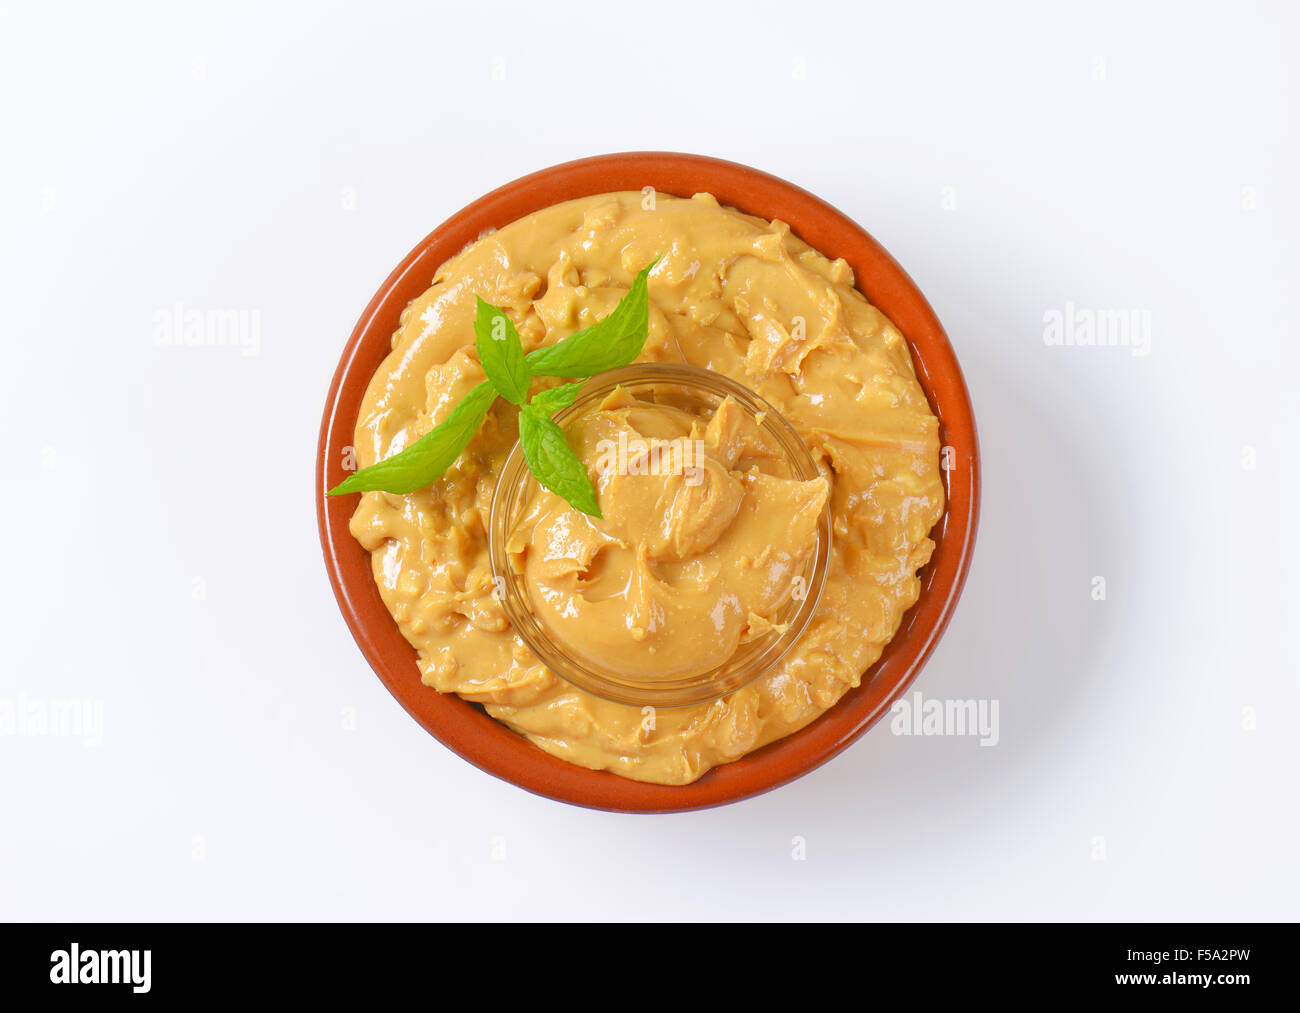 Crunchy peanut butter in a bowl Stock Photo